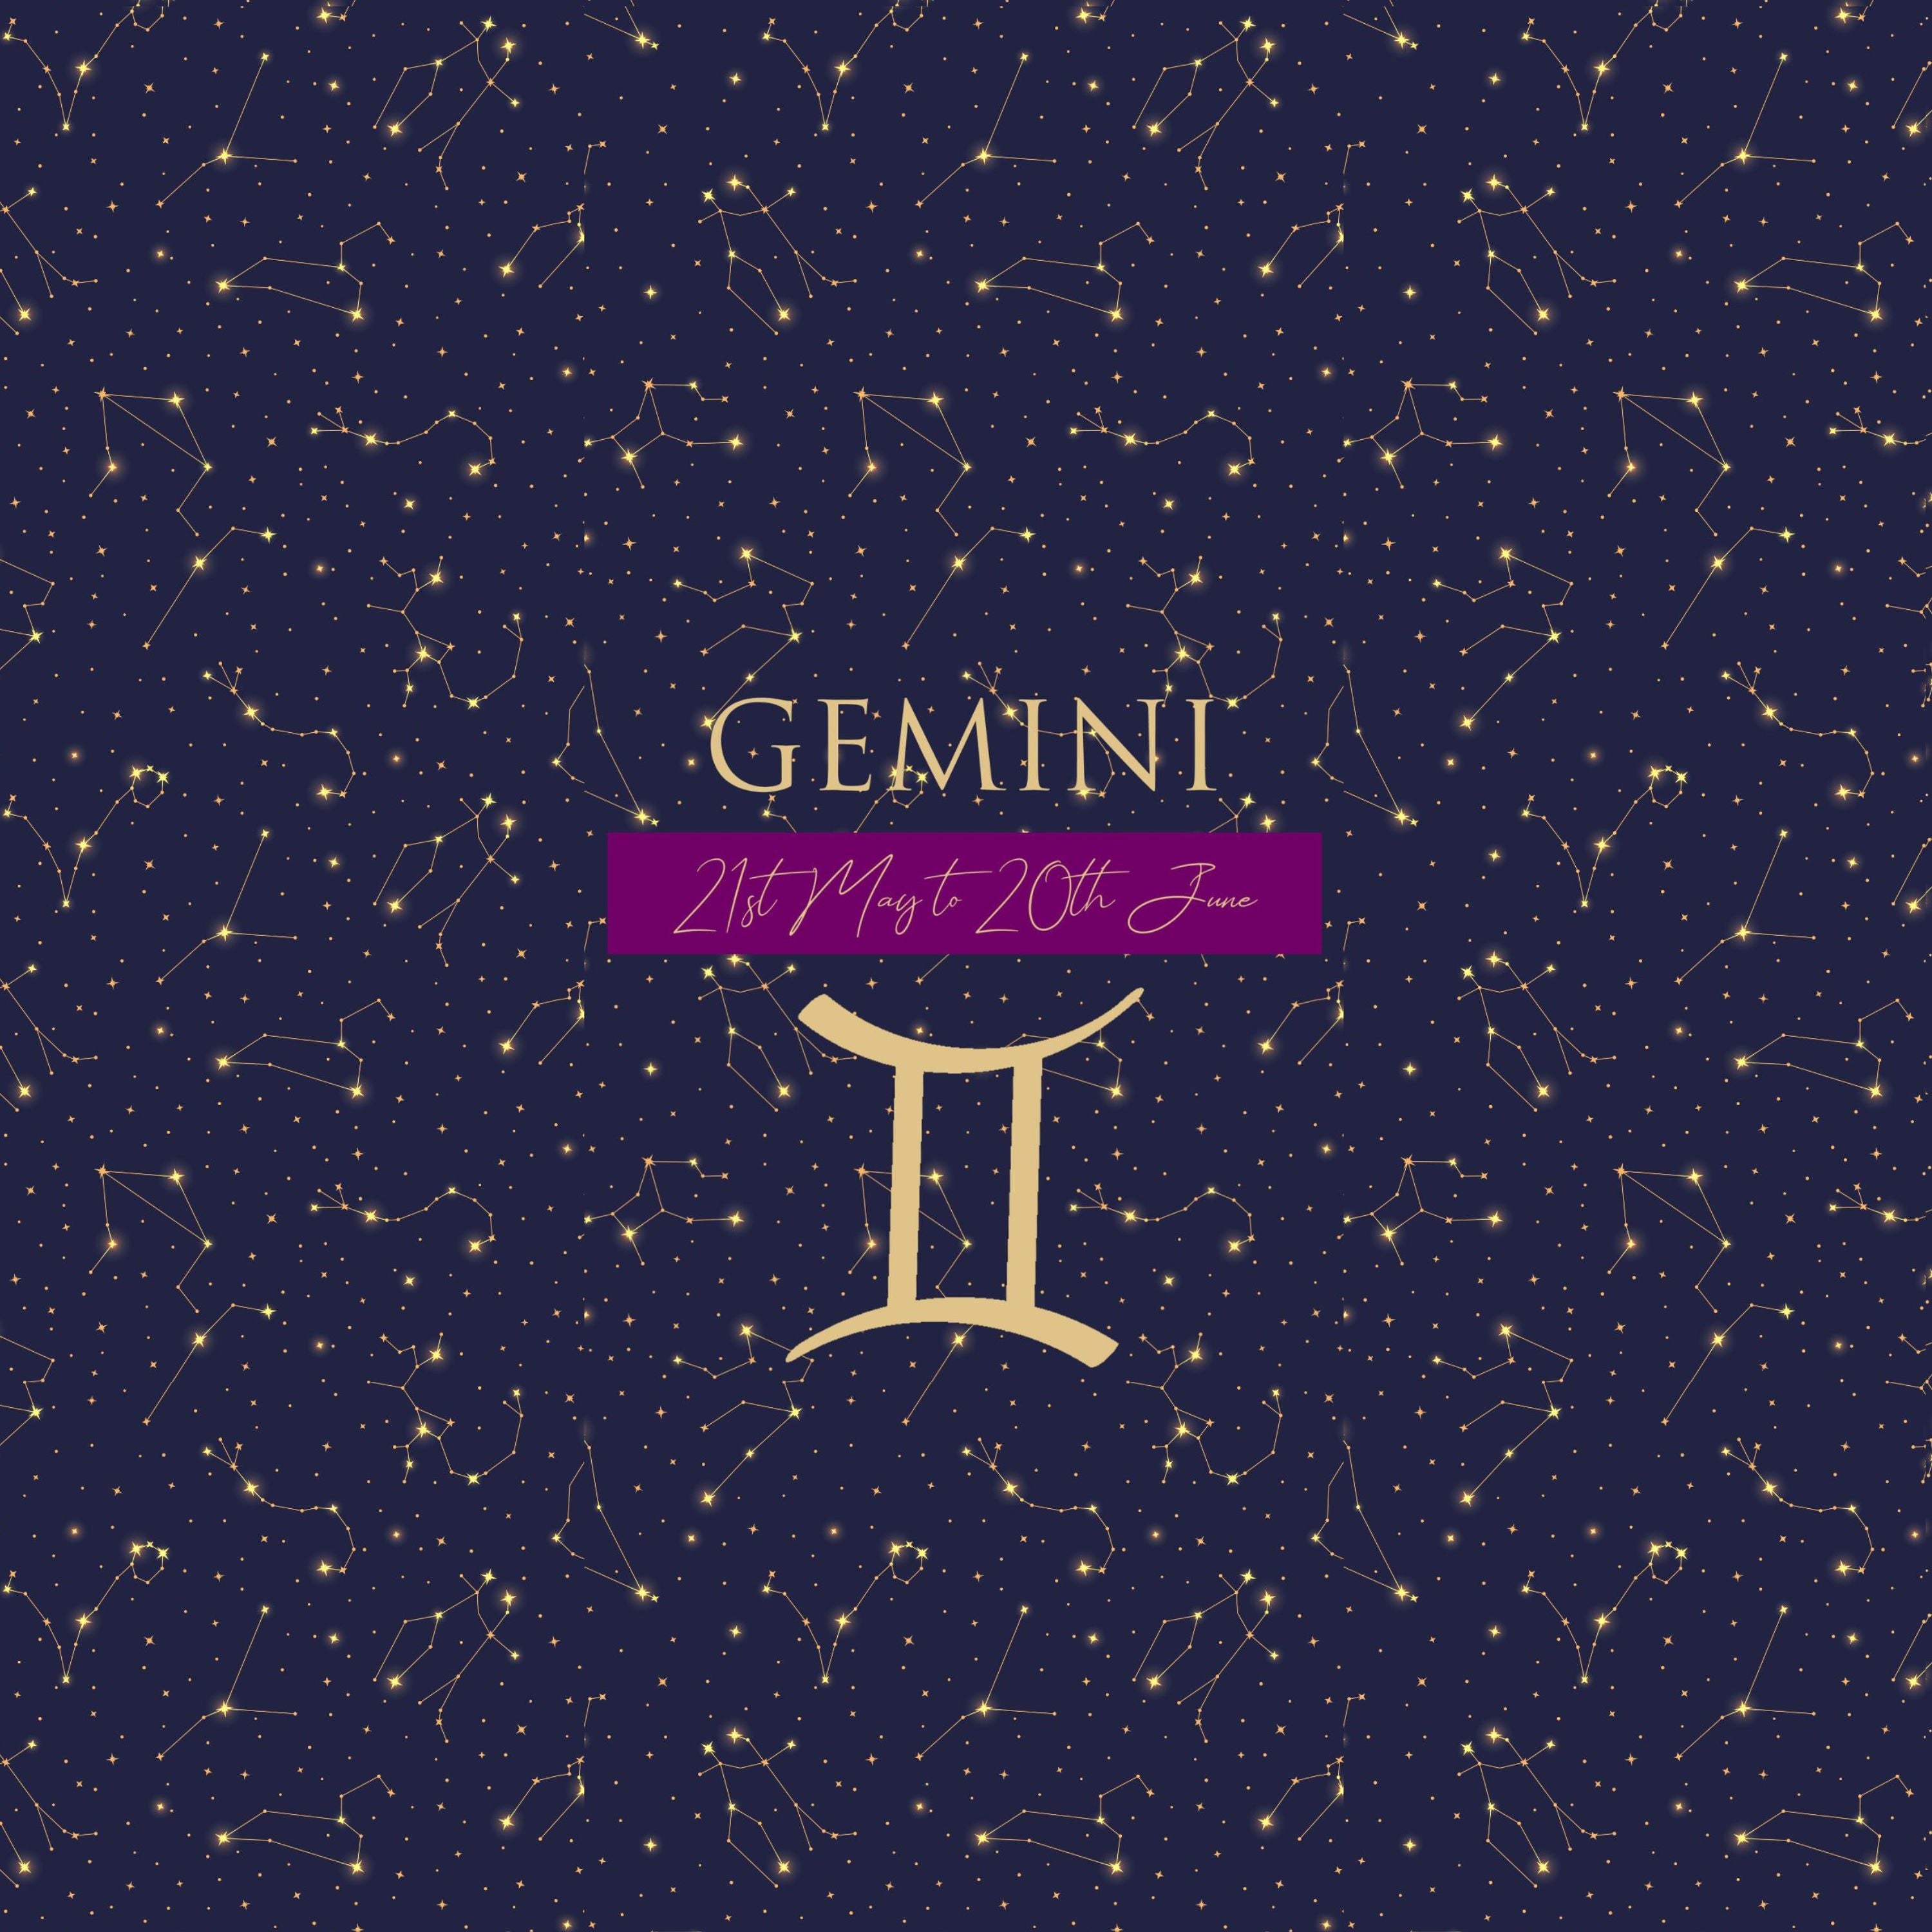 Blog post about Gemini zodiac sign and the gemstones that can help them.